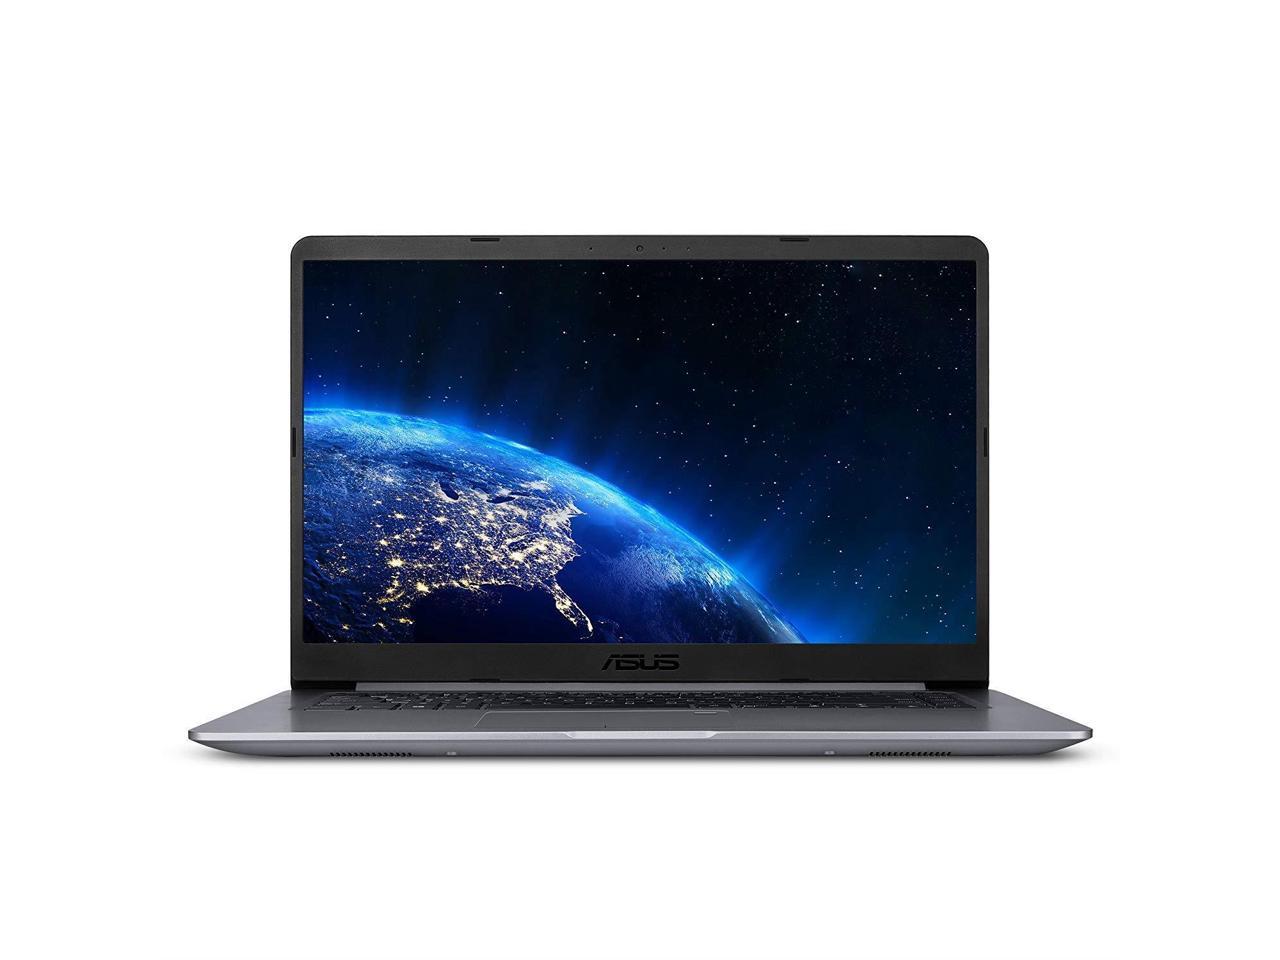 Newest Asus VivoBook Thin & Lightweight Laptop (16G DDR4/512G SSD)|15.6" Full HD(1920x1080) WideView display| AMD Quad Core A12-9720P Processor| Wi-Fi AC|Fingerprint Reader|HDMI |Windows 10 in S Mode